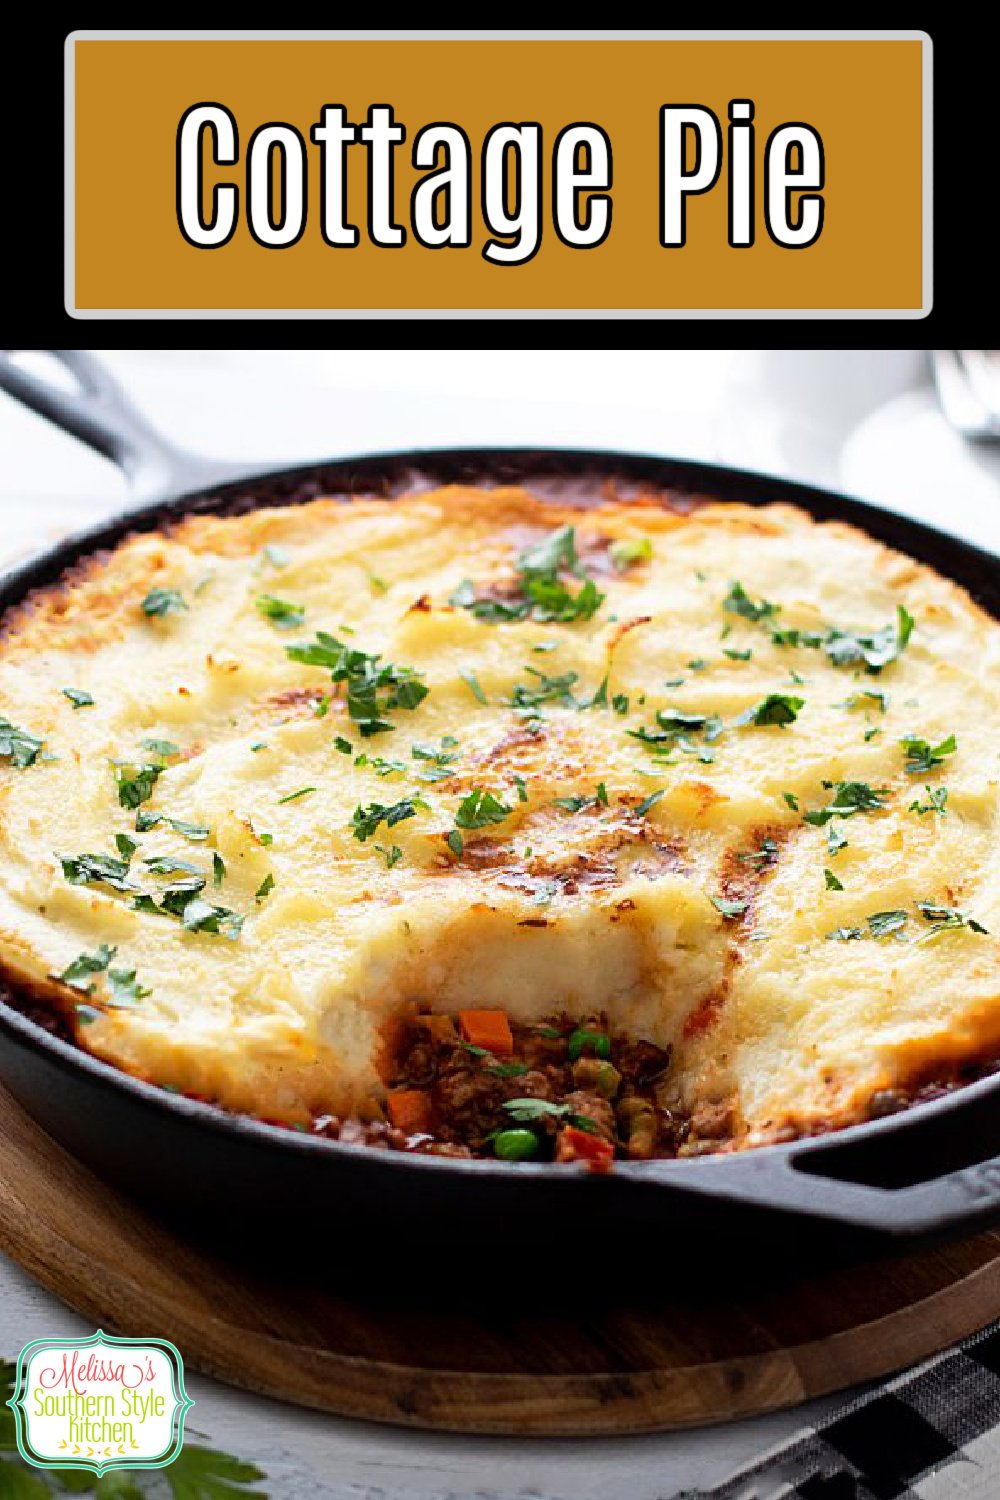 This mashed potato topped Cottage Pie features a flavorful ground beef and mixed vegetable filling that's simmered in a rich tomato sauce #cottagepie #pierecipes #shepherdspie #easygroundbeefrecipes #easypotpies #dinnerideas #groundbeef #mashedpotatoes #pies